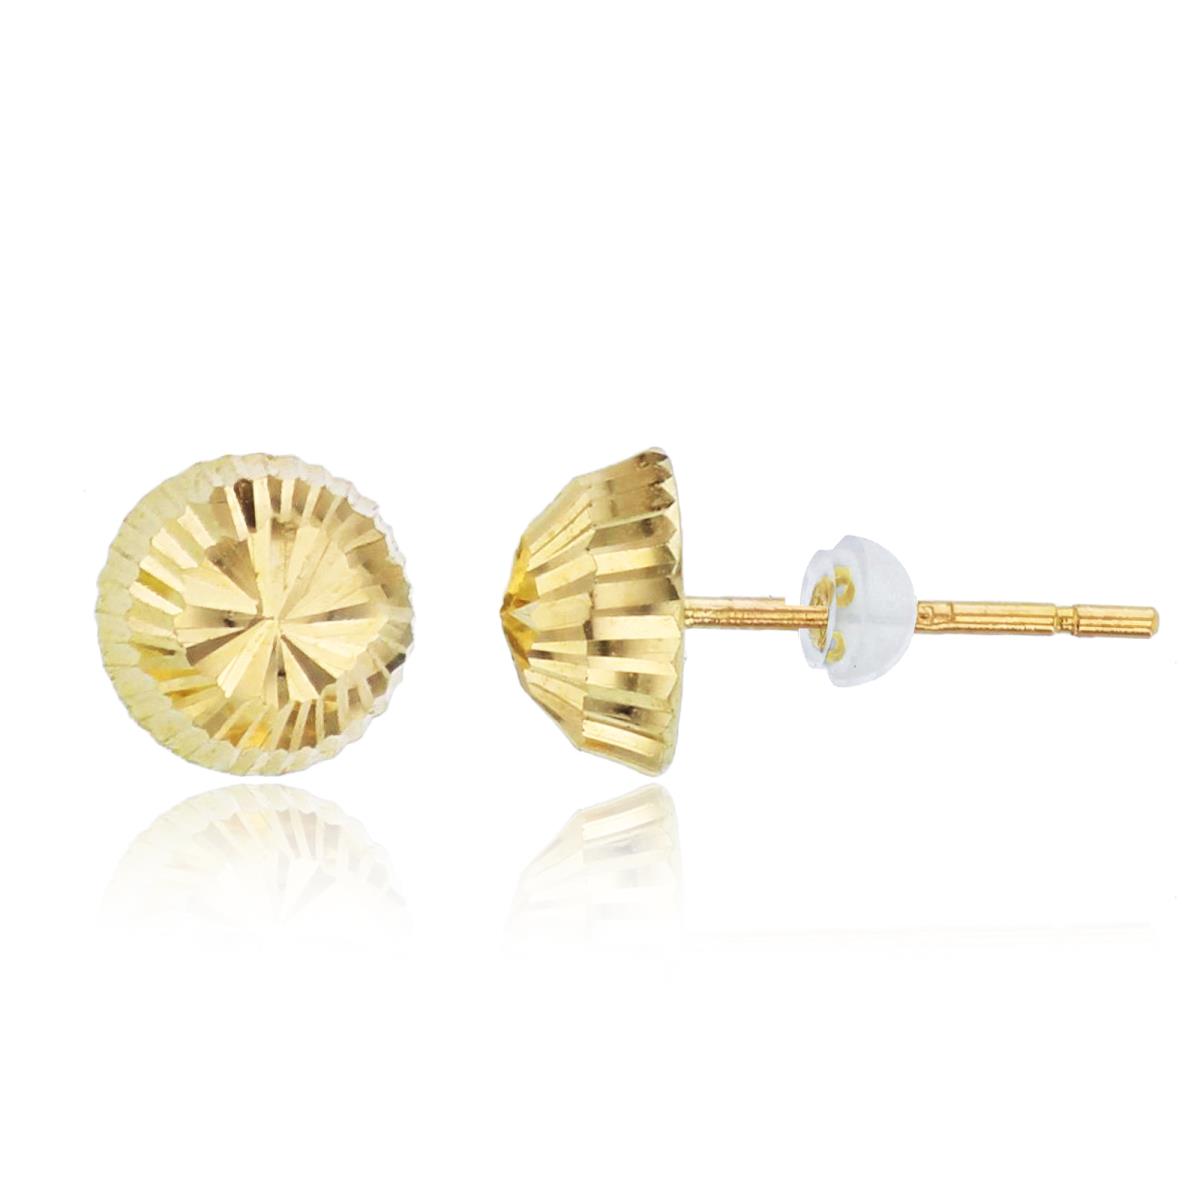 10K Yellow Gold High Polished Moon & DC Star Studs with Silicone Backs